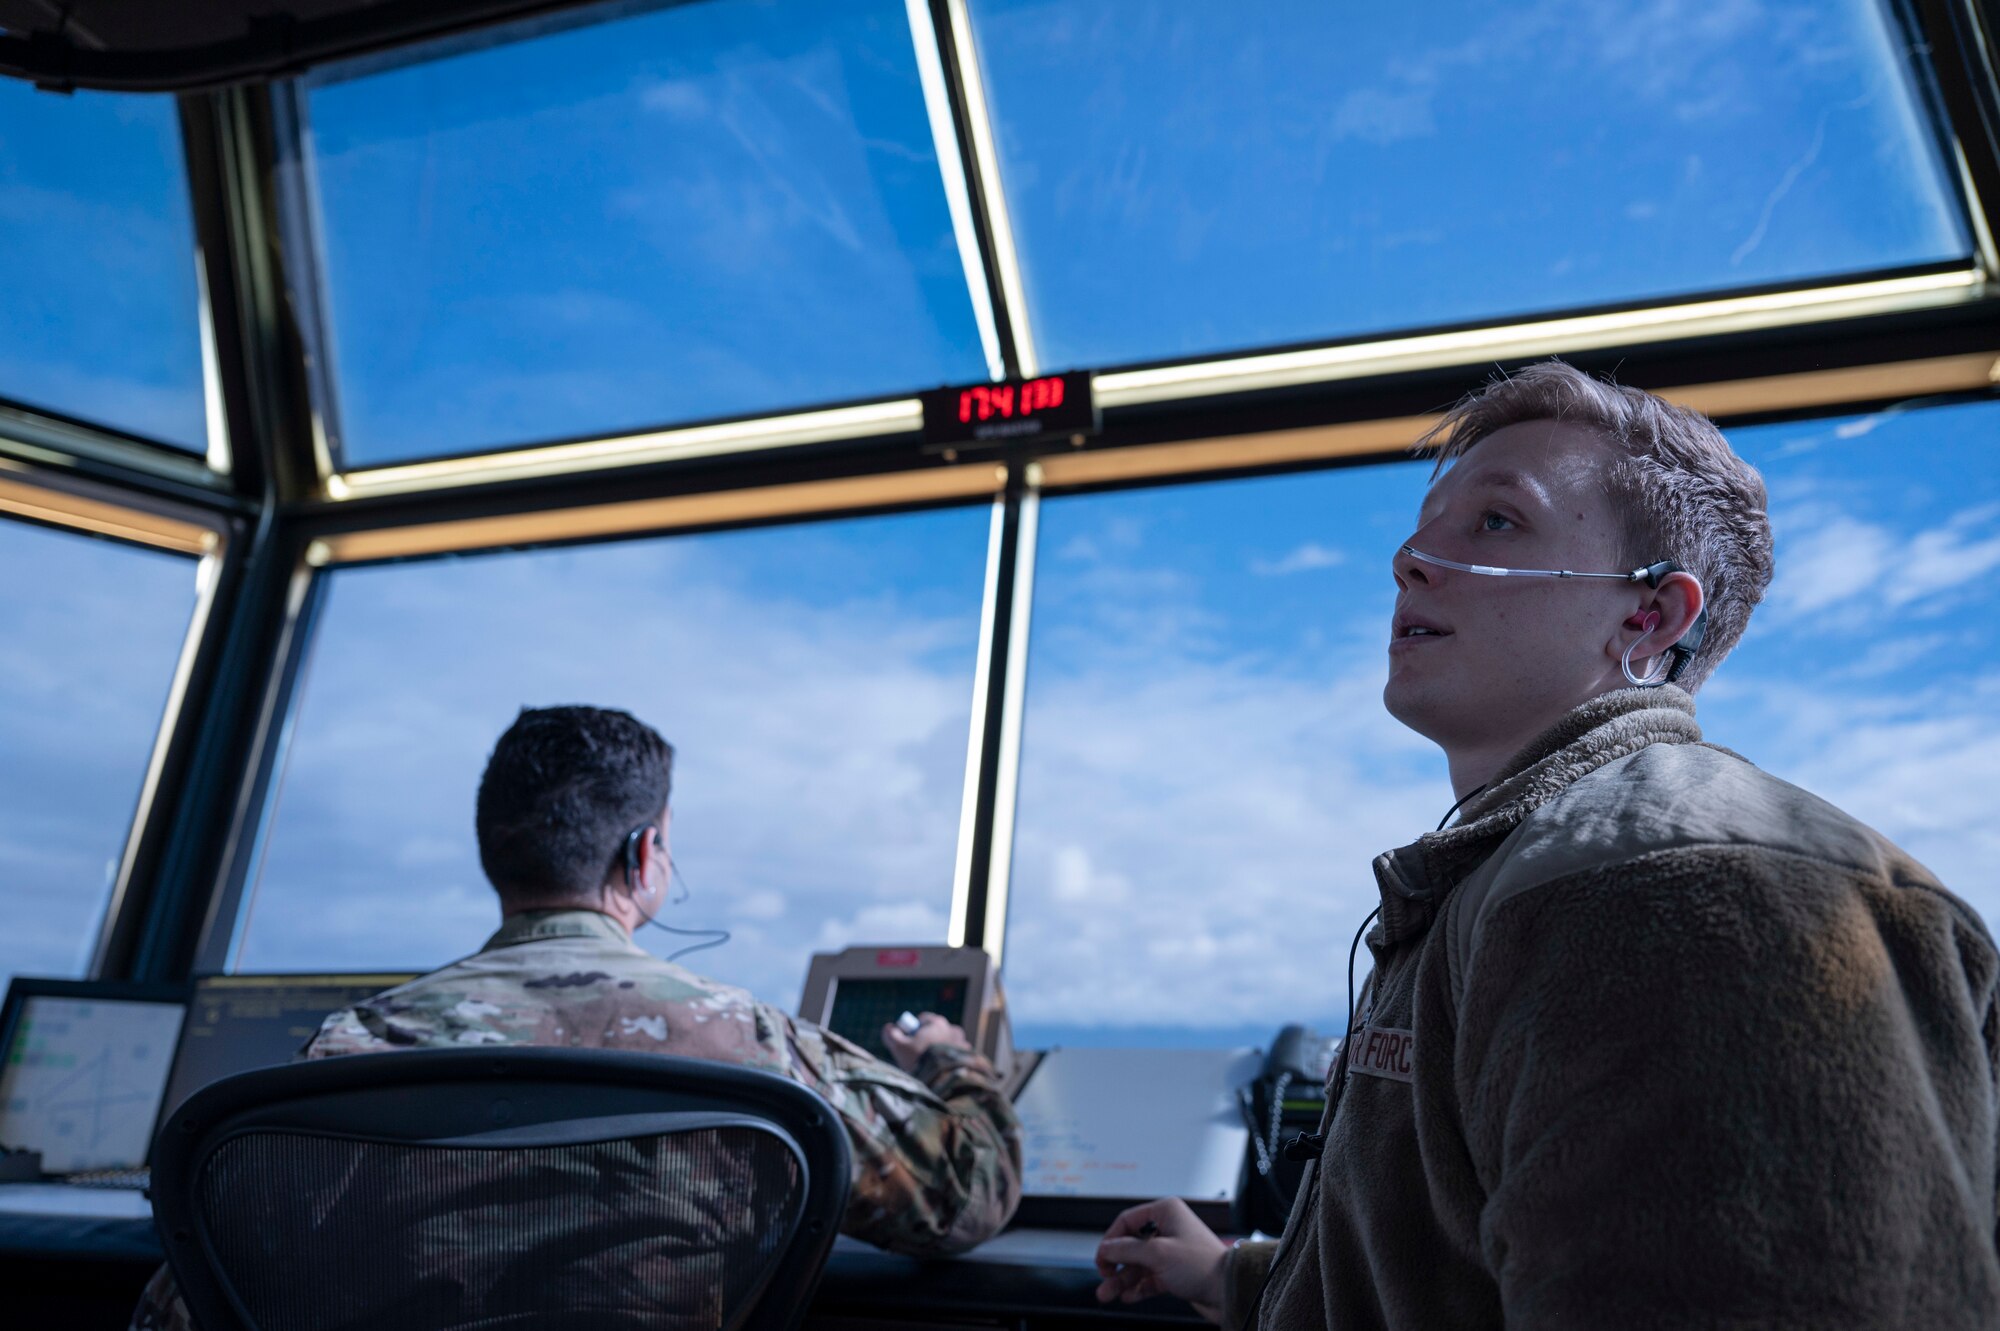 U.S. Air Force Senior Airman Kitt Kinsley (right), 54th Operations Support Squadron air traffic controller trainer, monitors aircraft movement on the flight line at Holloman Air Force Base, New Mexico, Jan. 24, 2024. ATC’s transmit and listen to multiple frequencies at one time and are responsible for separating and directing aircraft movement during all flightline operations. (U.S. Air Force photo by Airman 1st Class Michelle Ferrari)